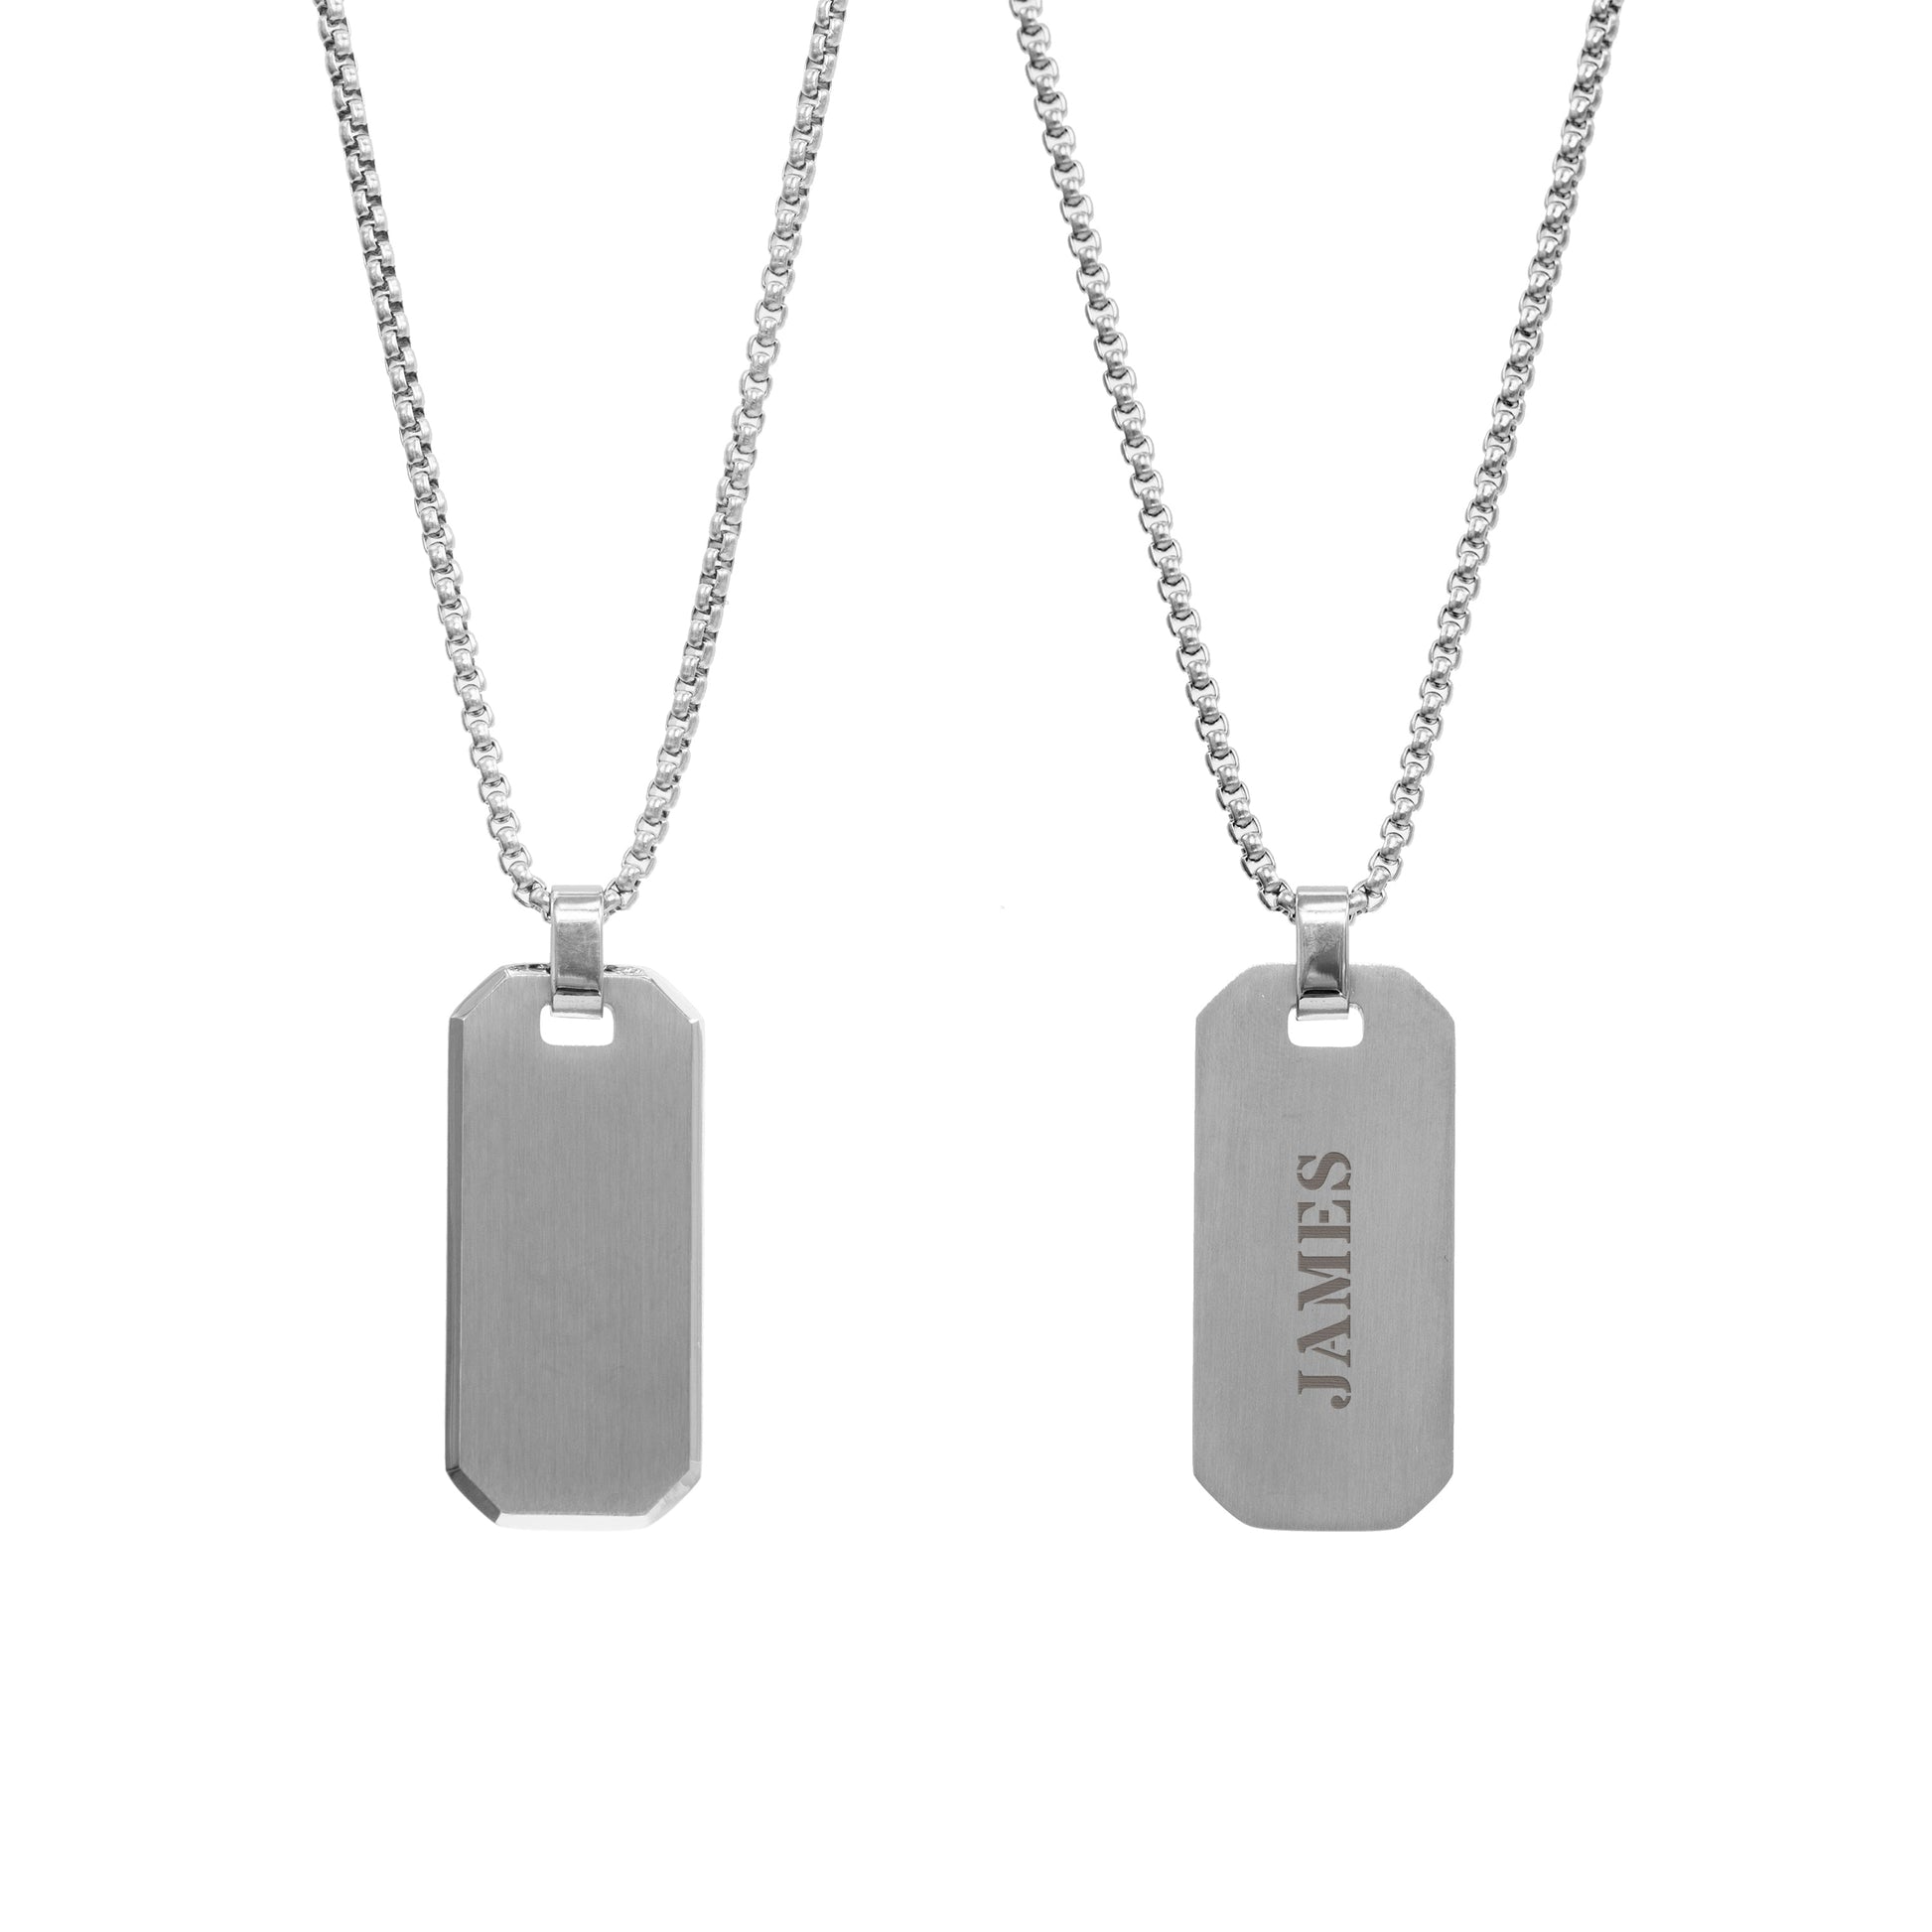 Personalized men's necklaces - Personalized Men's Brushed Steel Dog Tag Necklace 